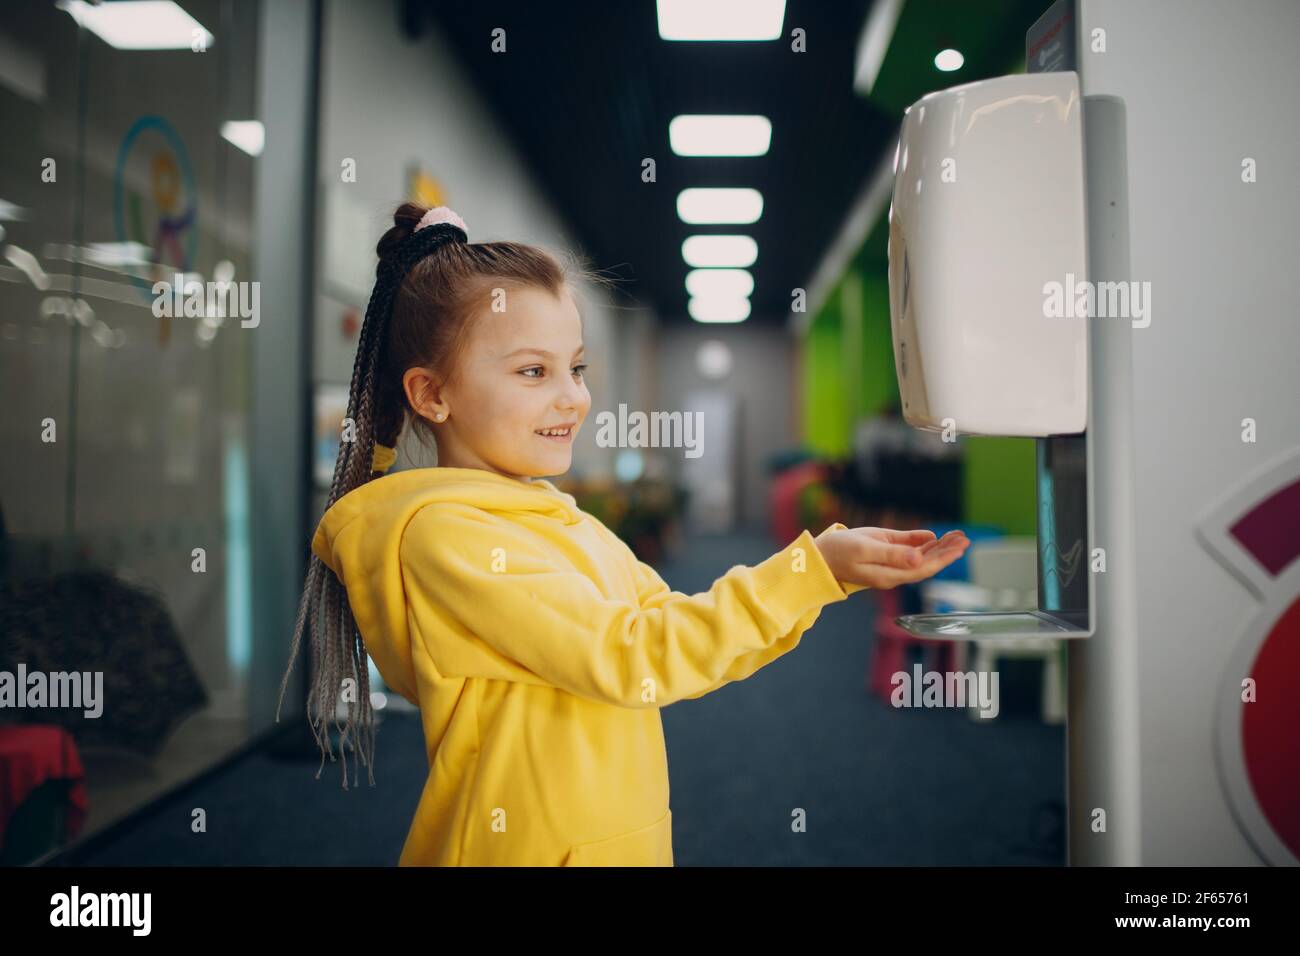 Child girl using automatic alcohol gel dispenser spraying on hands sanitizer machine antiseptic disinfectant, new normal life after Coronavirus COVID-19 pandemia. Stock Photo